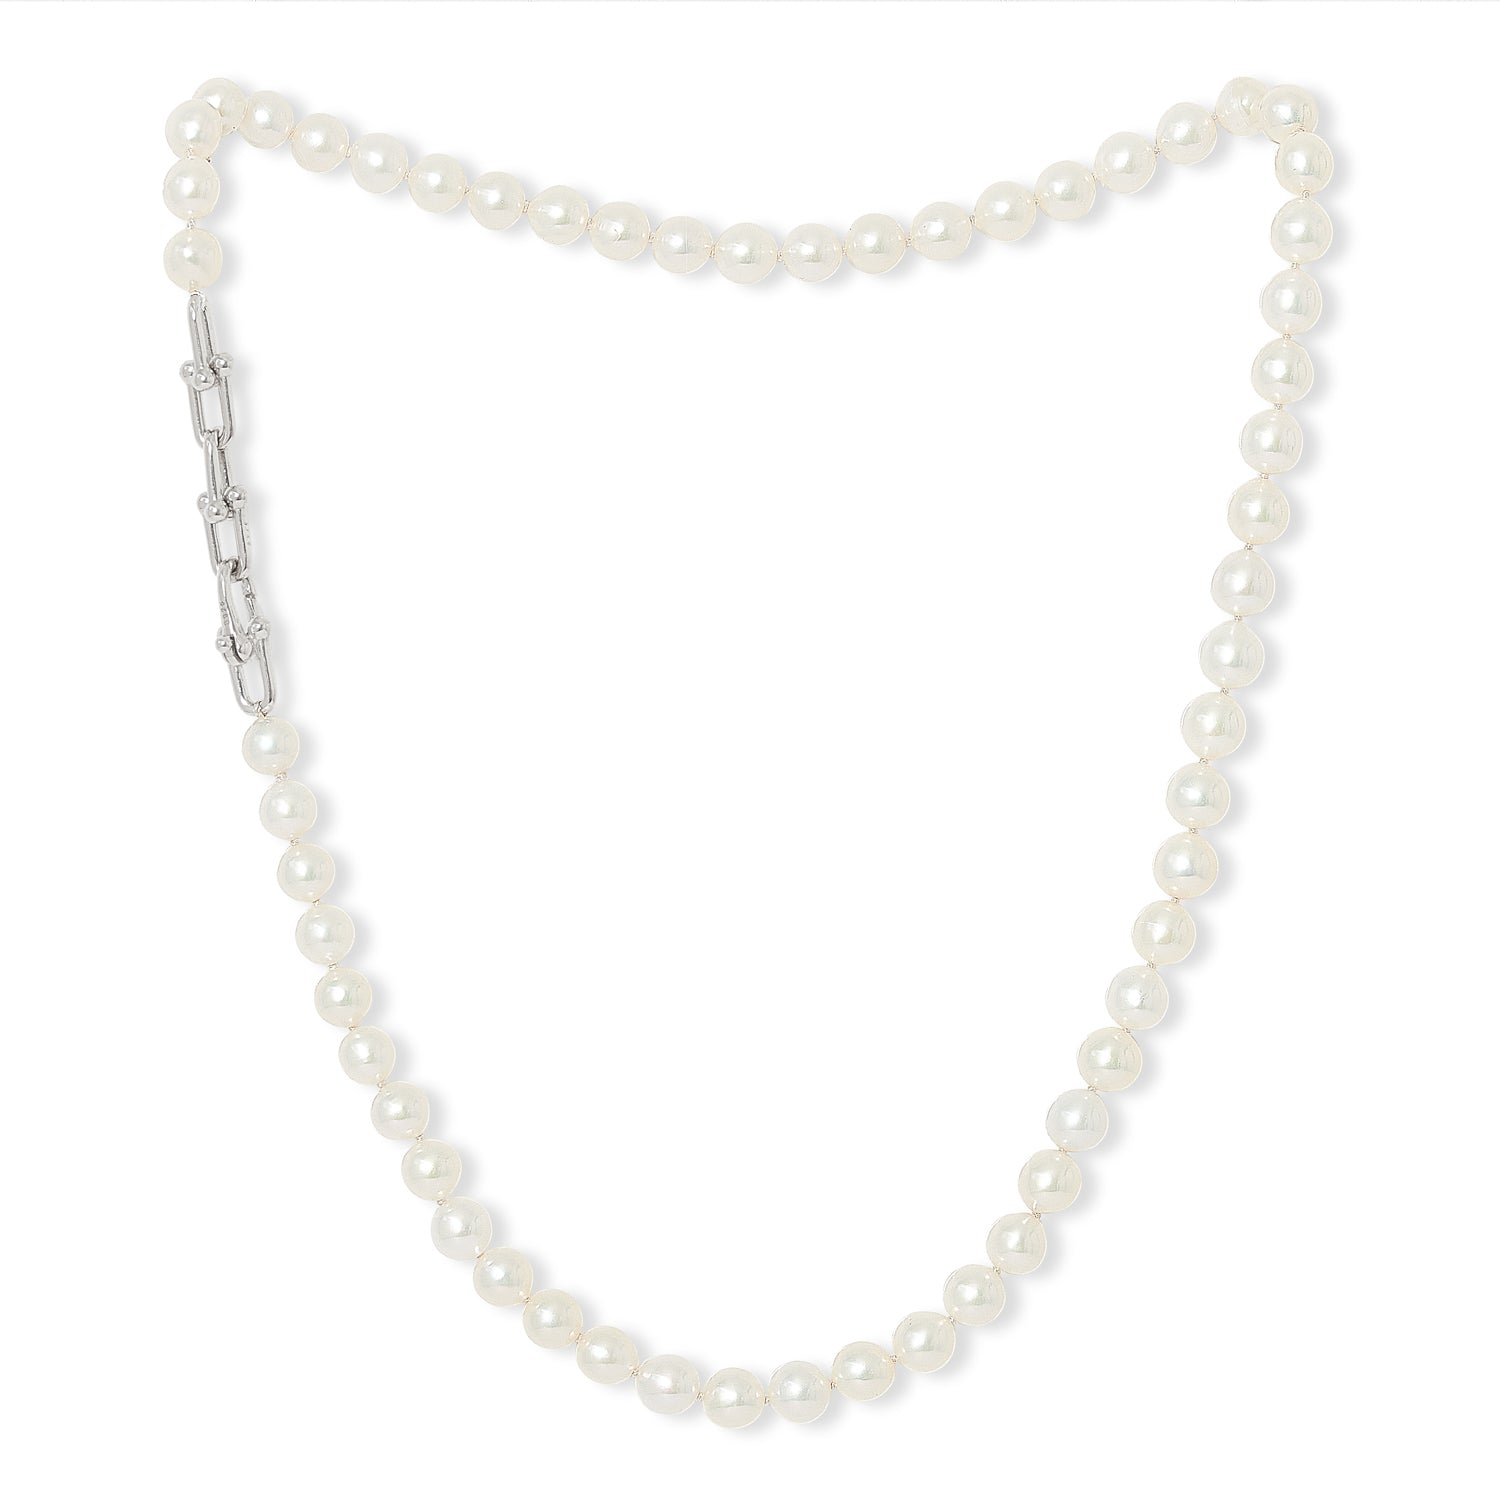 Women’s White / Silver Gratia Cultured Freshwater Pearl Necklace With Chunky Silver Chain Feature Pearls of the Orient Online